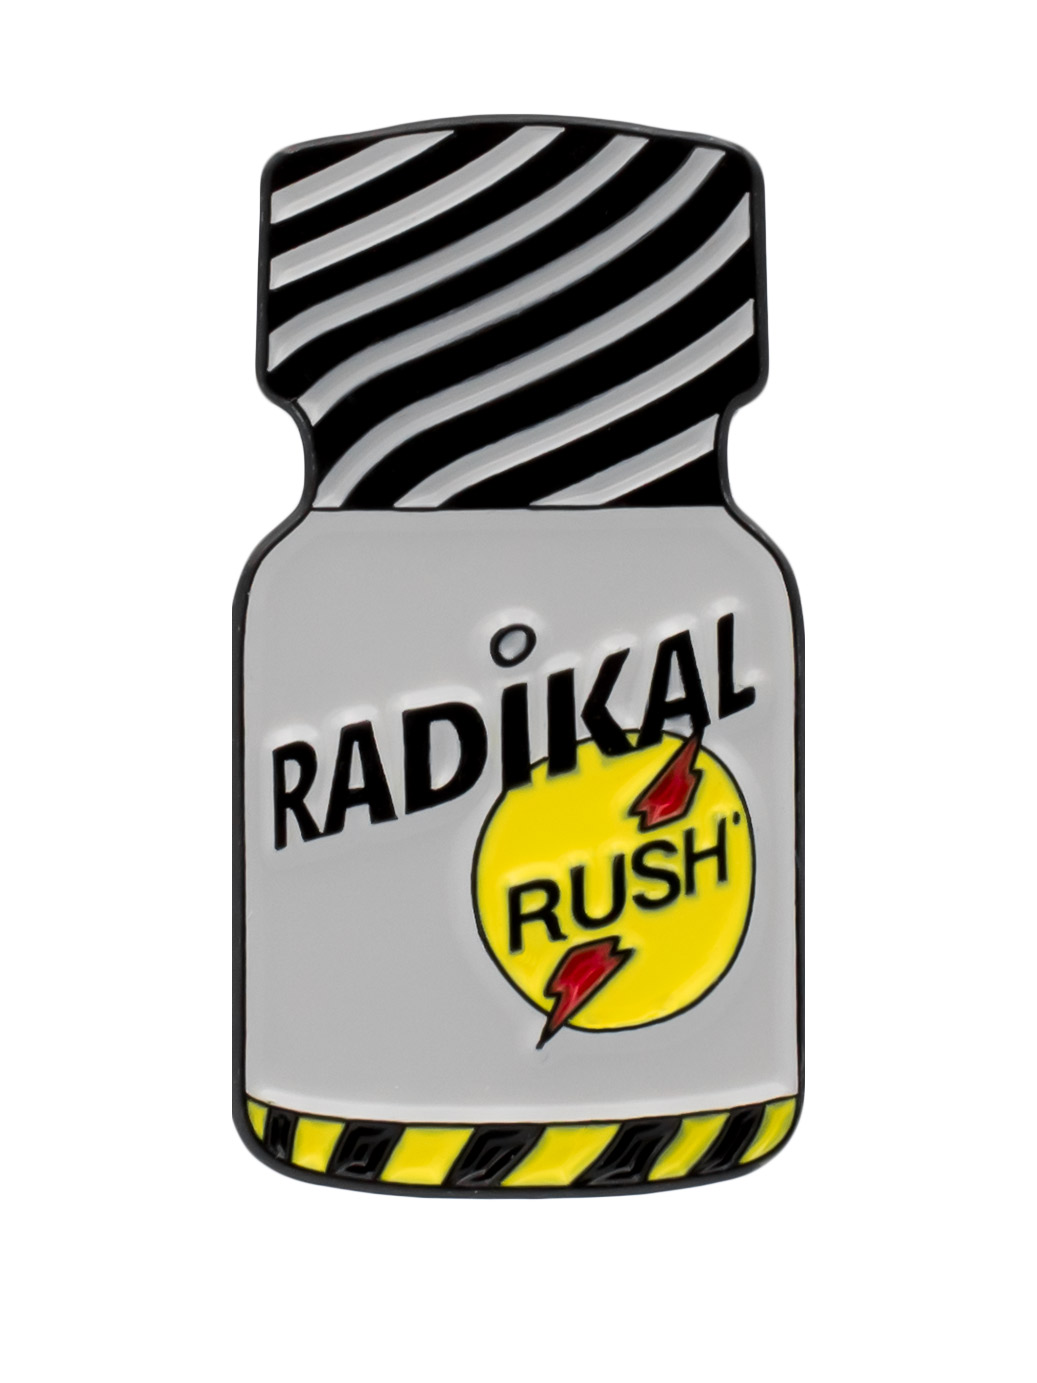 https://www.gayshop69.com/dvds/images/product_images/popup_images/poppers-pin-radikal-rush__1.jpg